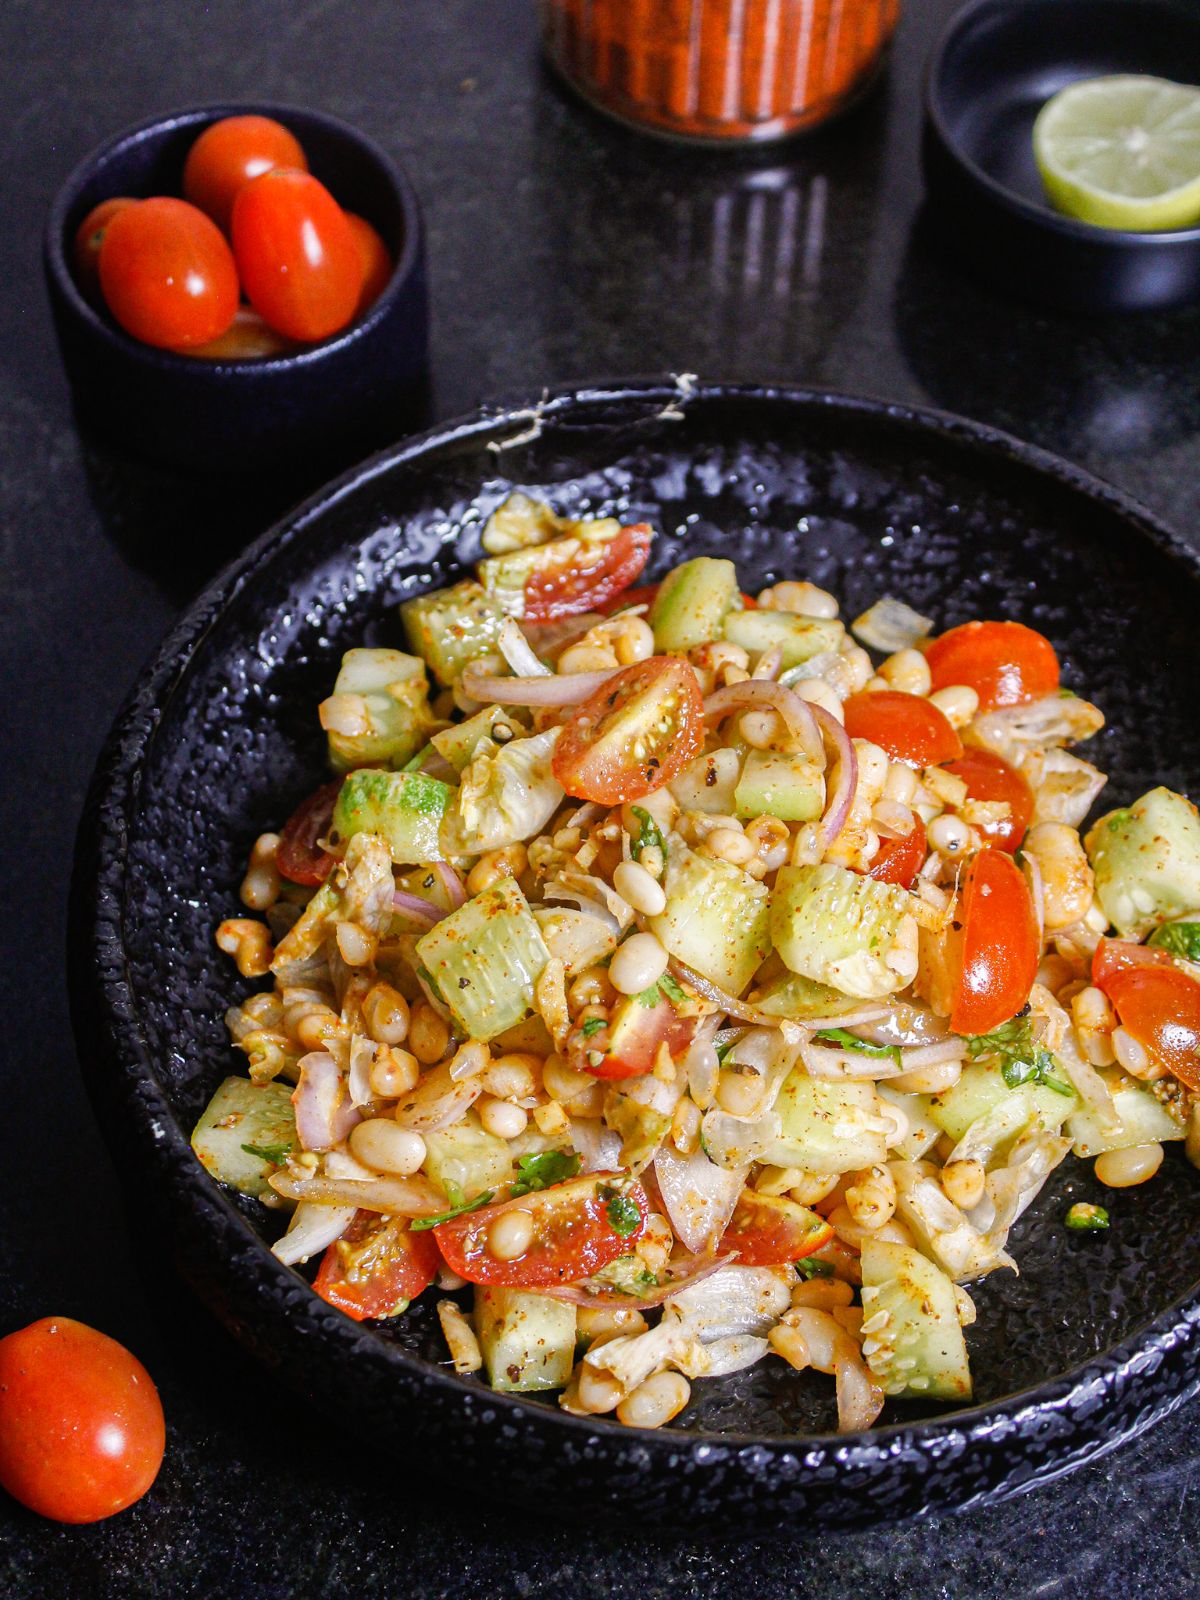 Super delicious and healhty Boiled Soyabean Salad